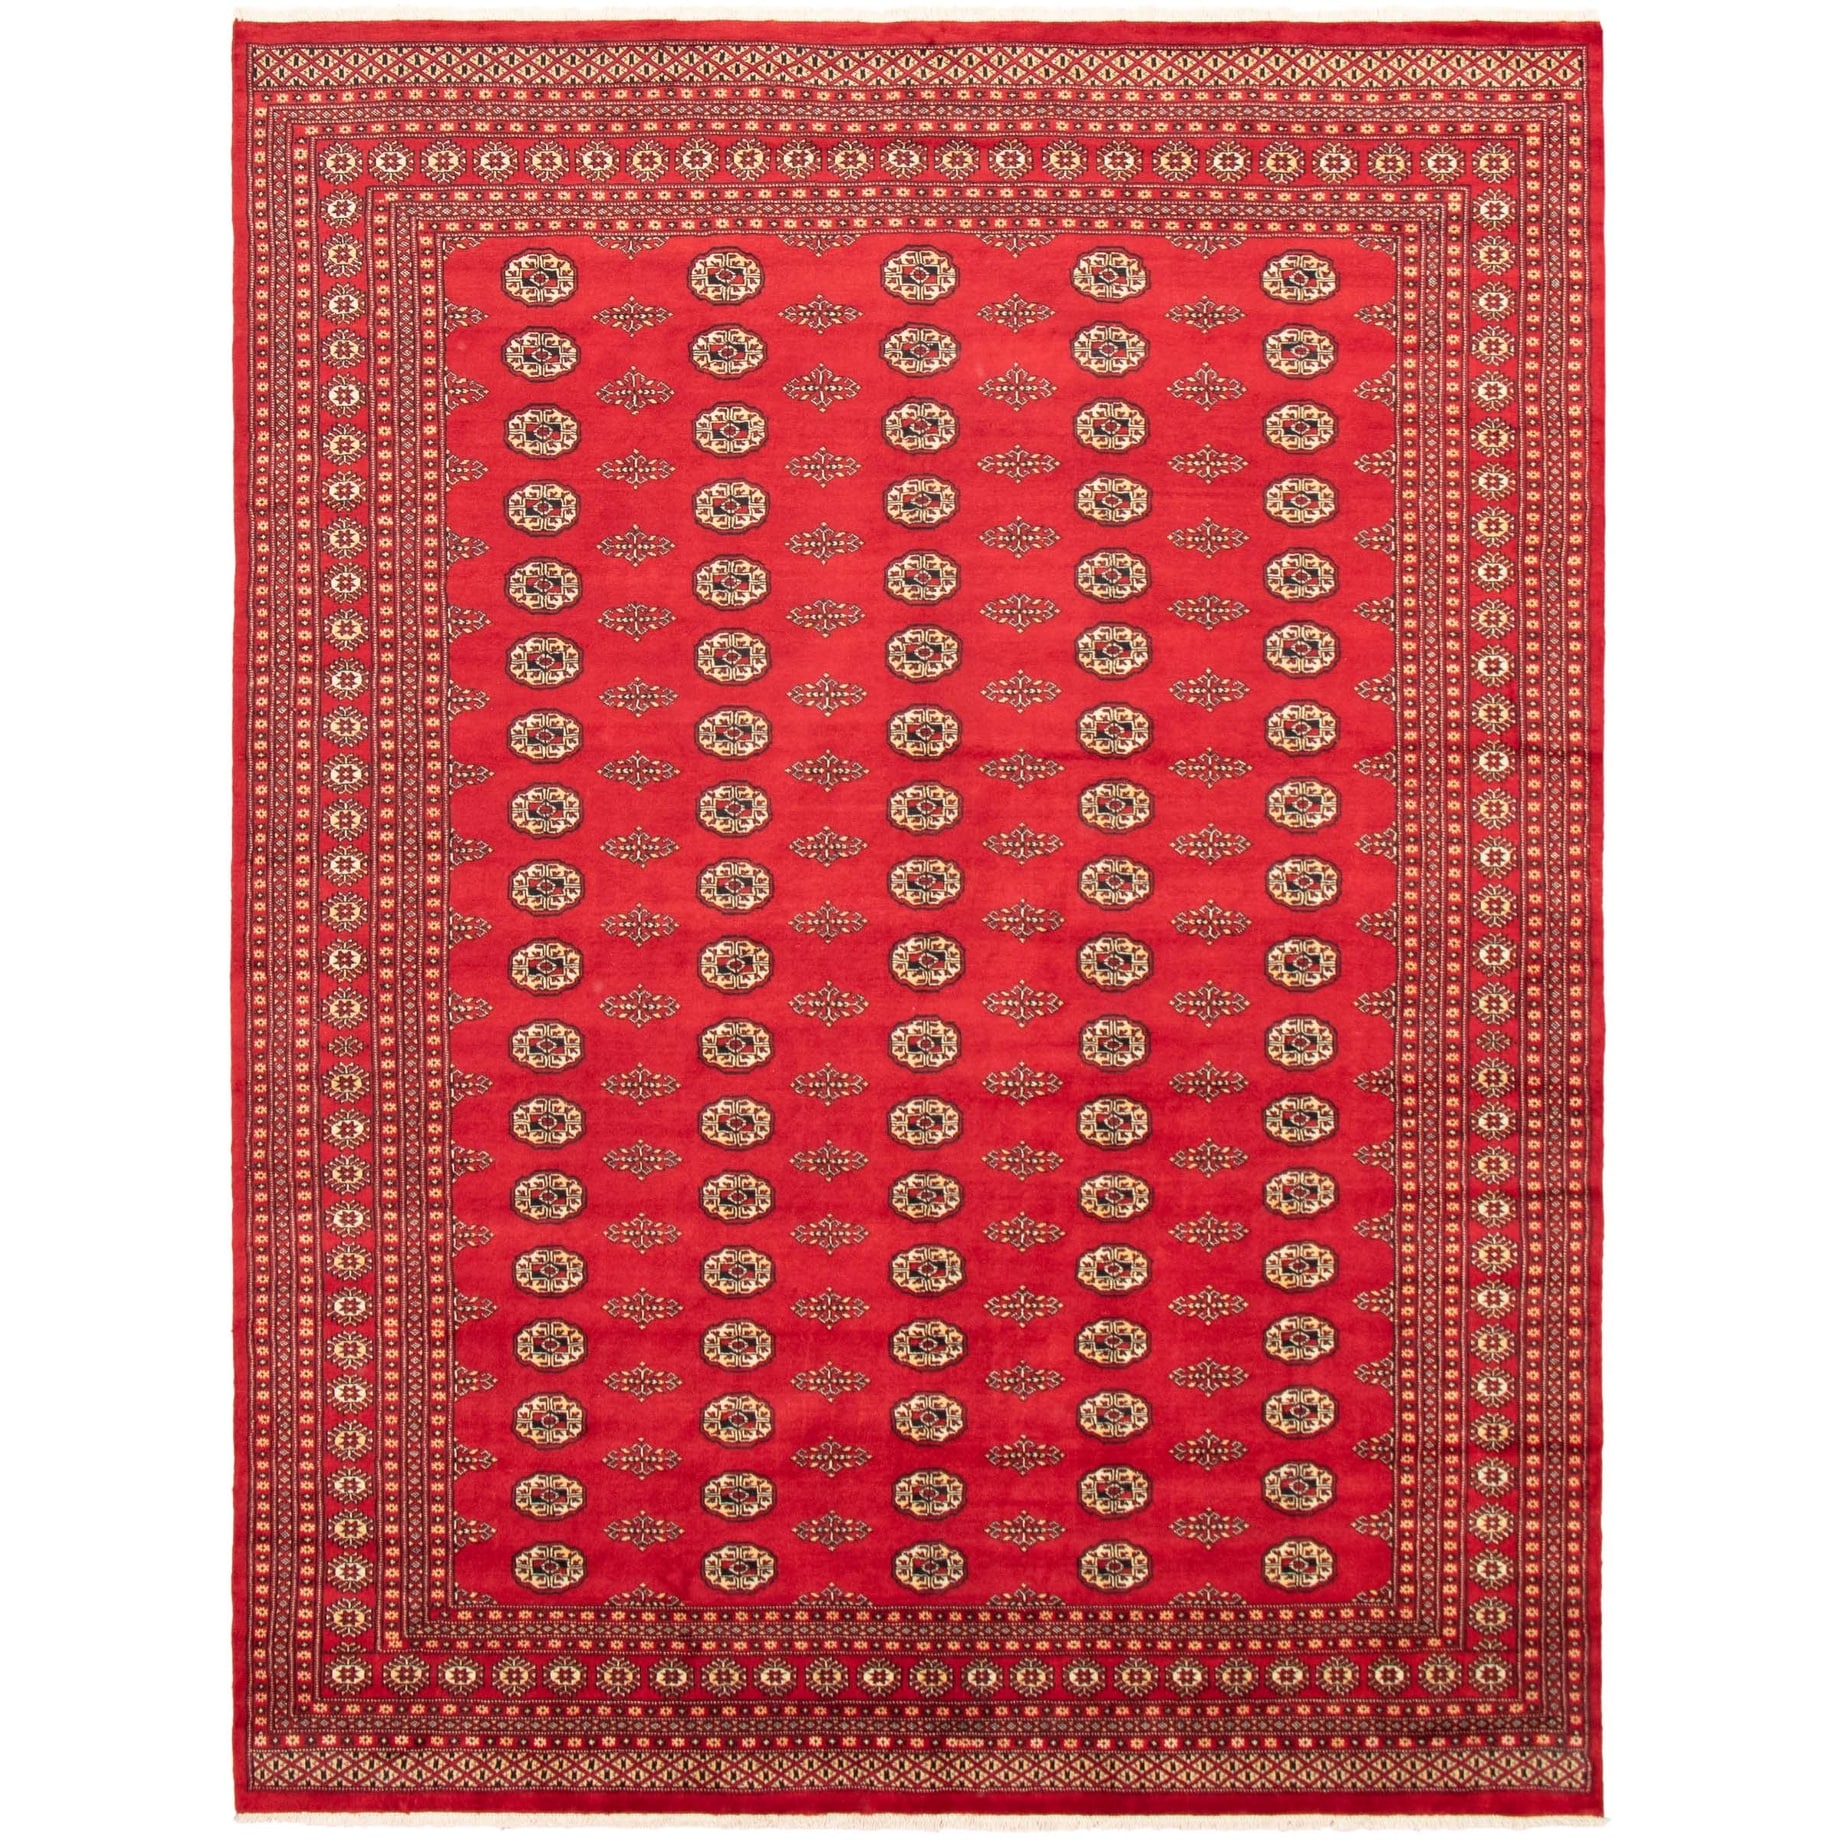 363161 Finest Peshawar Bokhara Bordered Red Rug 8'11 x 12'0 Bedroom Hand-Knotted Wool Rug eCarpet Gallery Large Area Rug for Living Room 